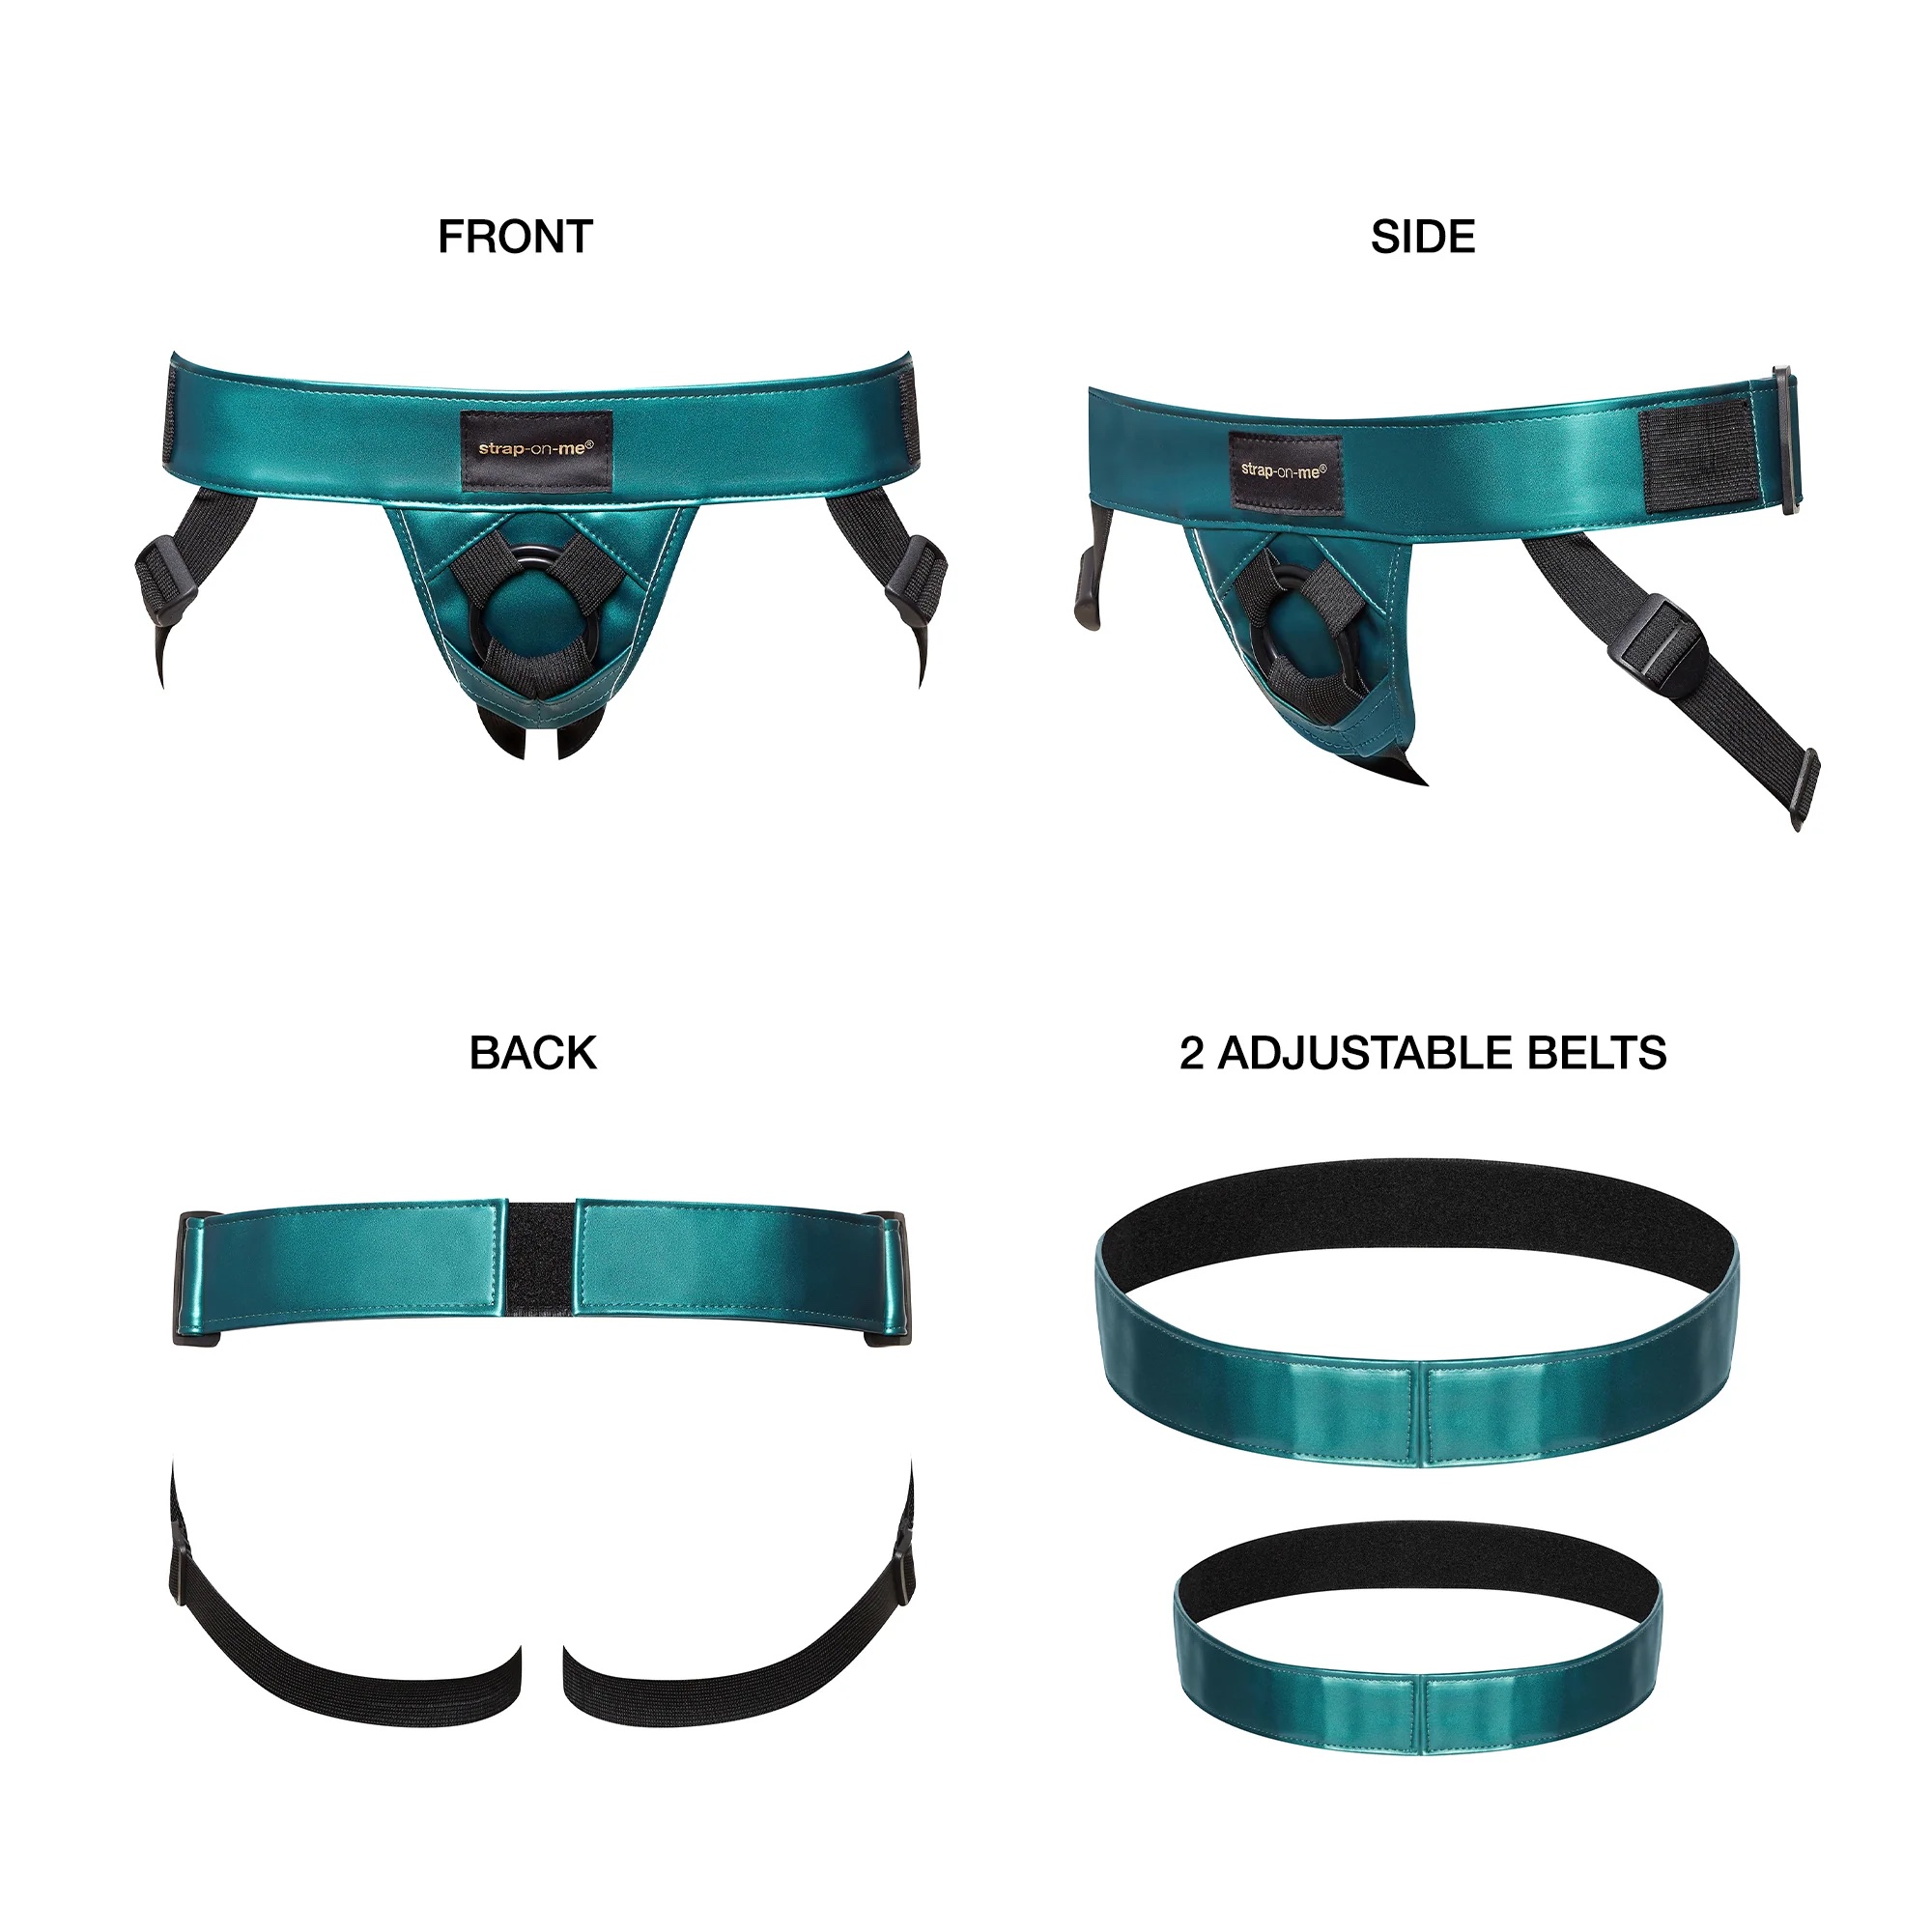 LEATHERETTE HARNESS CURIOUS - Metallic Green